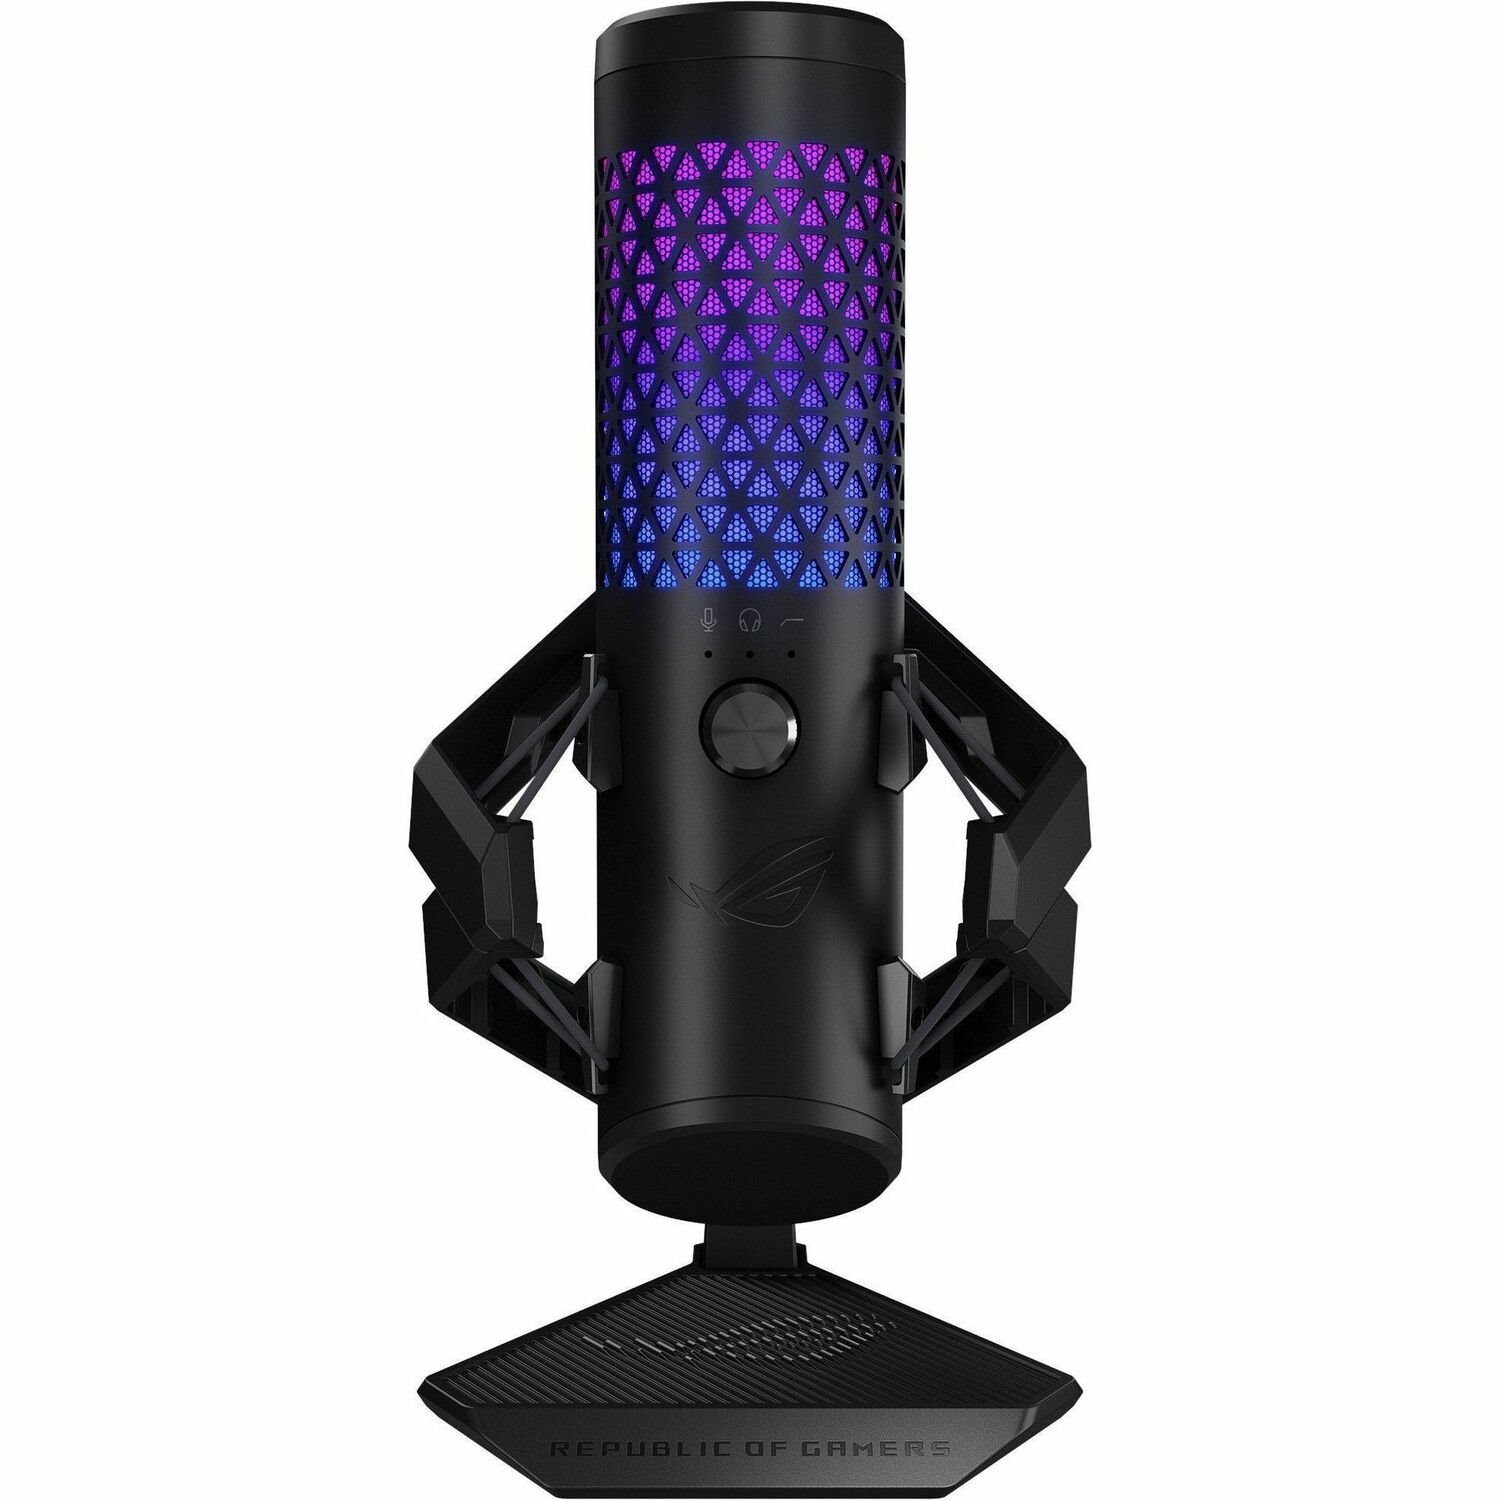 Asus ROG Carnyx Wired Condenser Microphone for Gaming, Studio, Recording, Podcasting, Live Streaming - Black